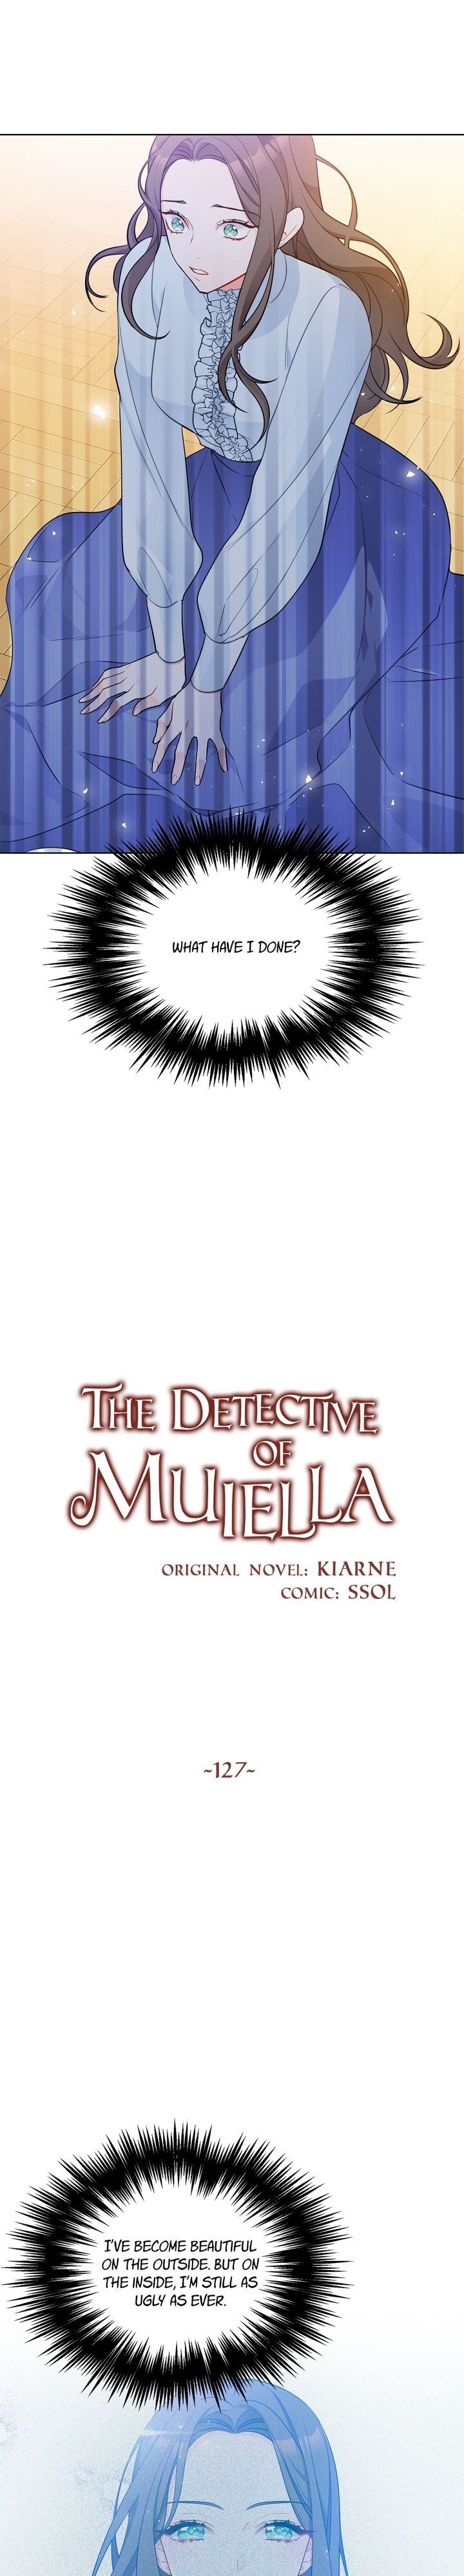 The Detective Of Muiella - Page 2